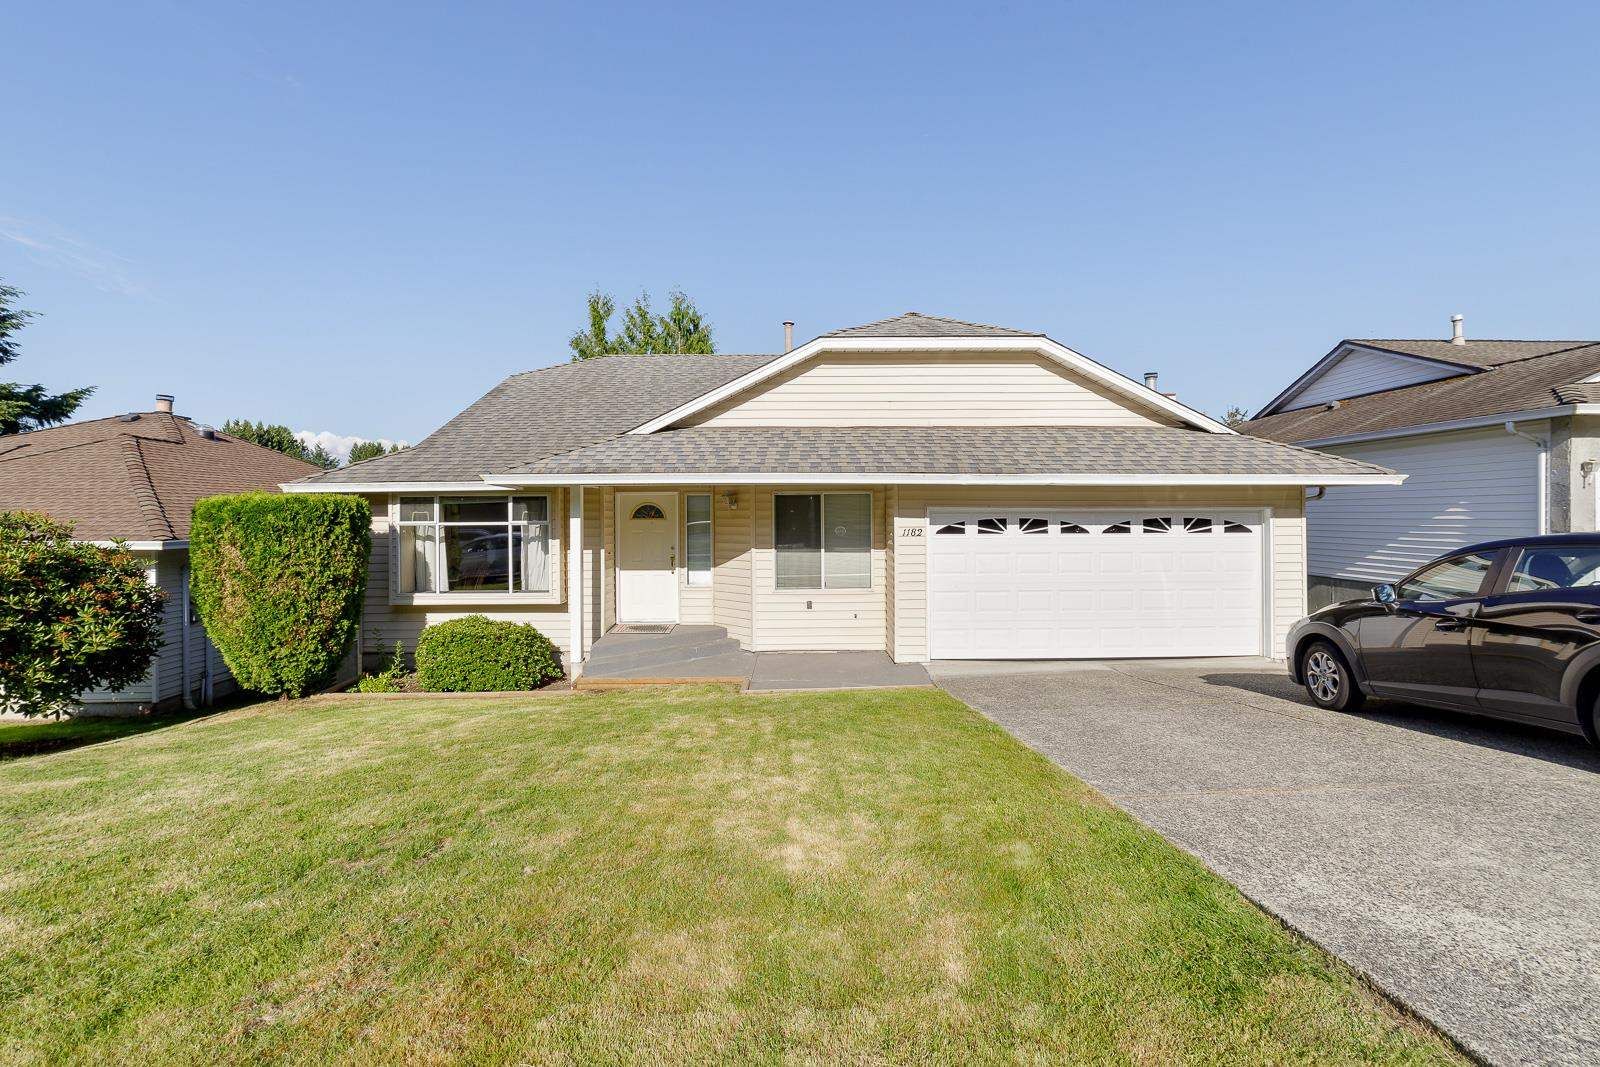 Main Photo: 1182 FRASERVIEW STREET in Port Coquitlam: Citadel PQ House for sale : MLS®# R2593936